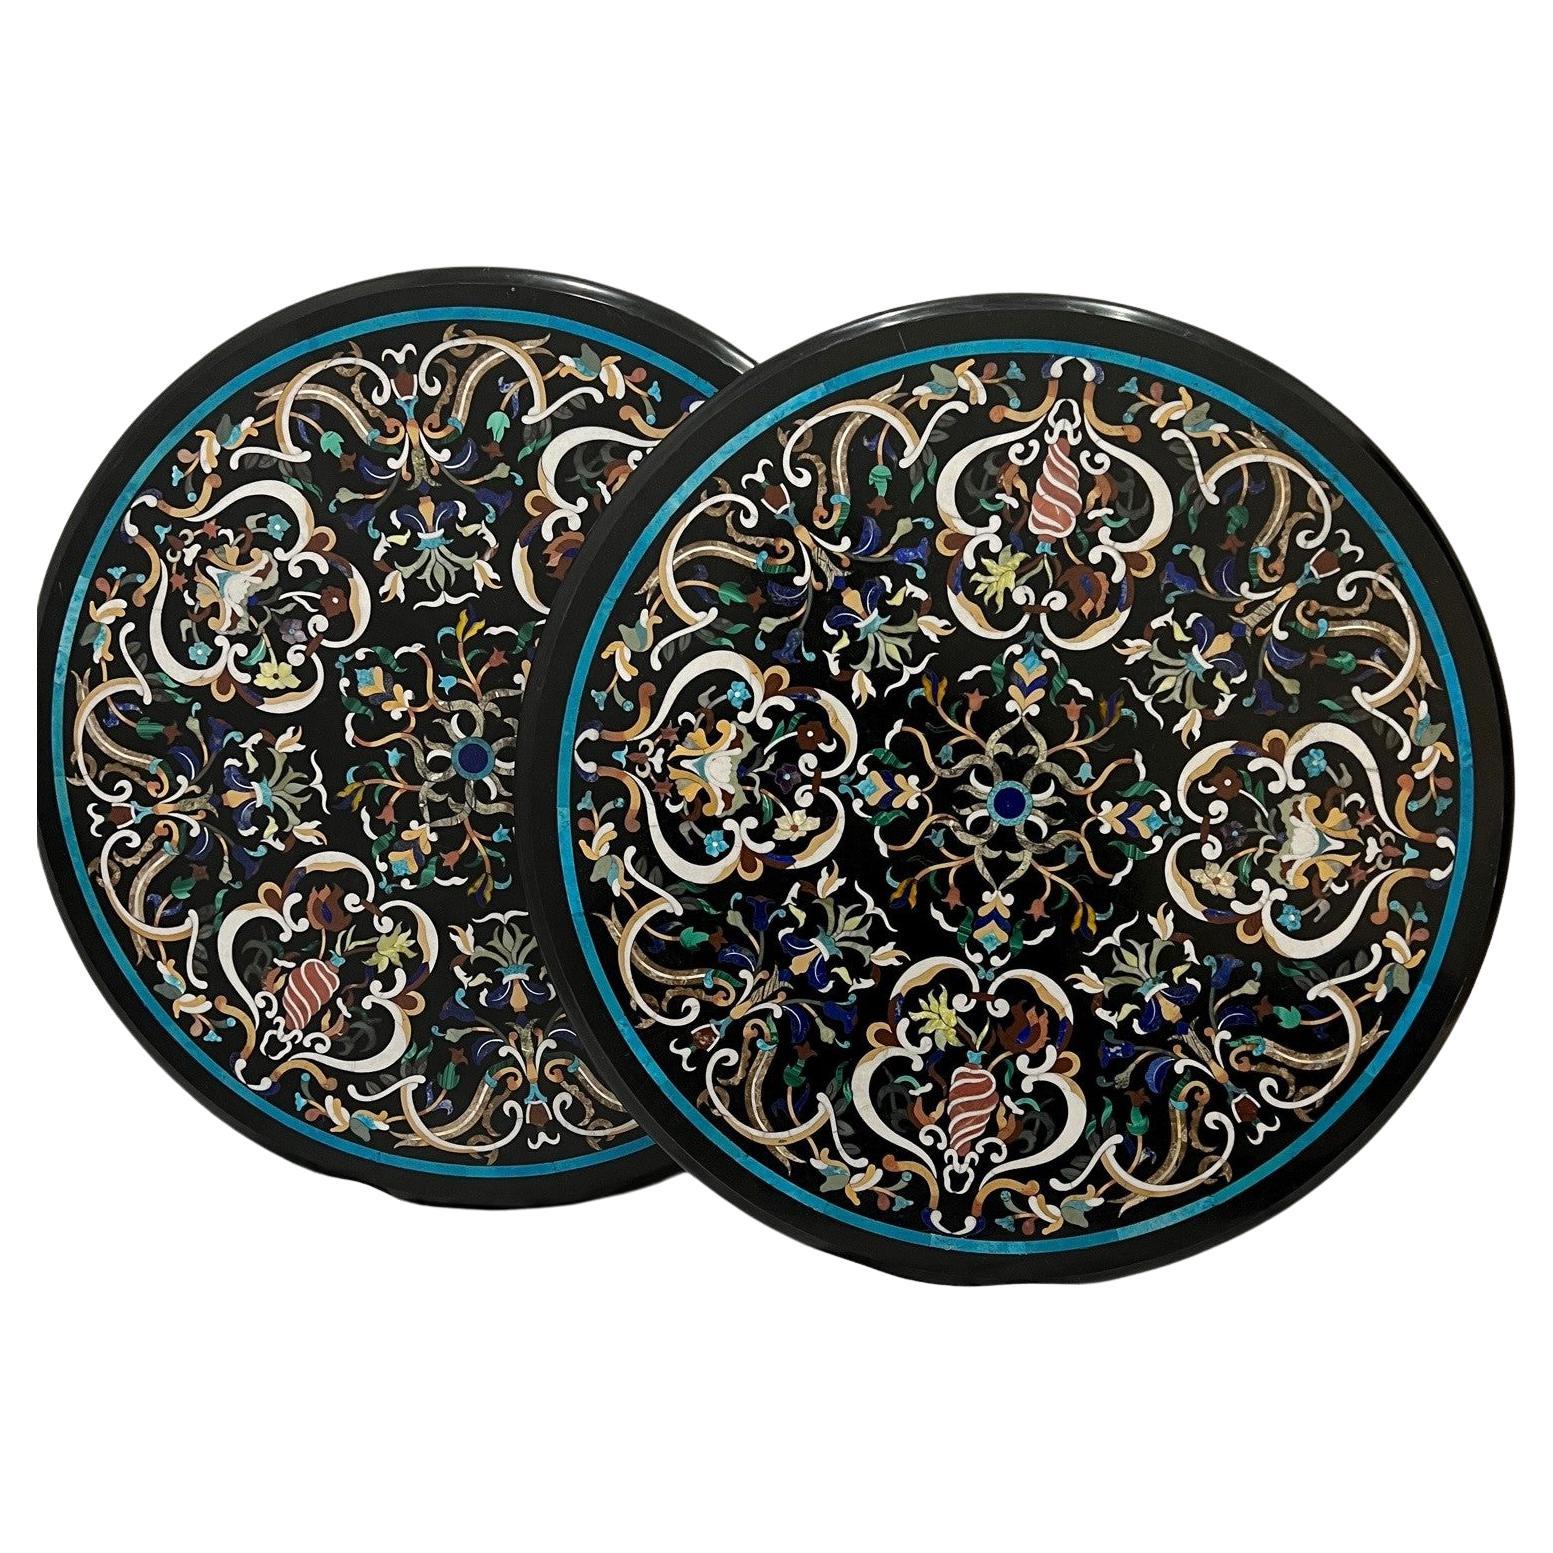 Matching Pair of Pietra Dura Table Tops Inlaid with Semi-Precious Stones